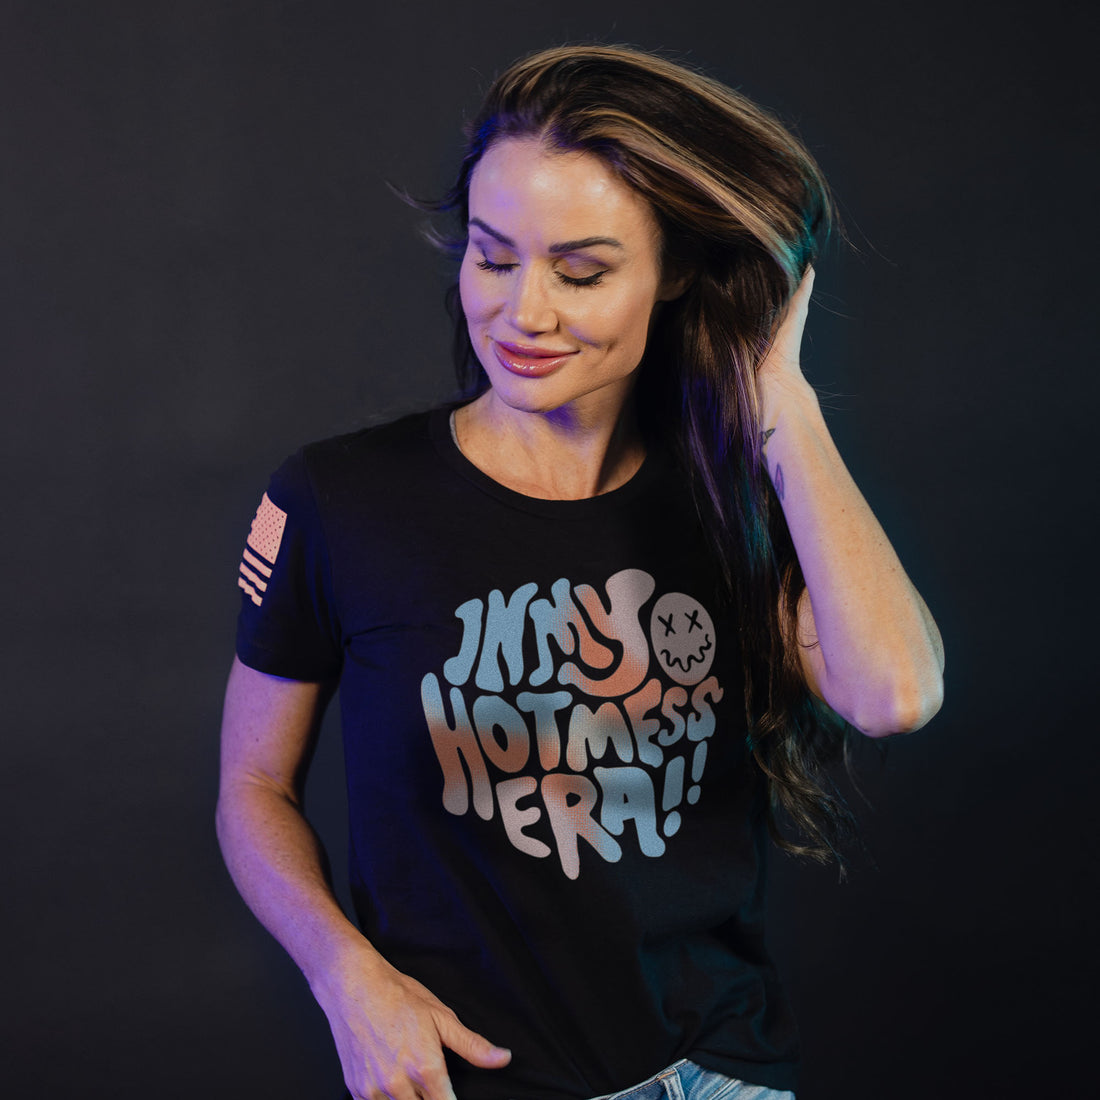 Hot Mess - Funny Shirts for Women 